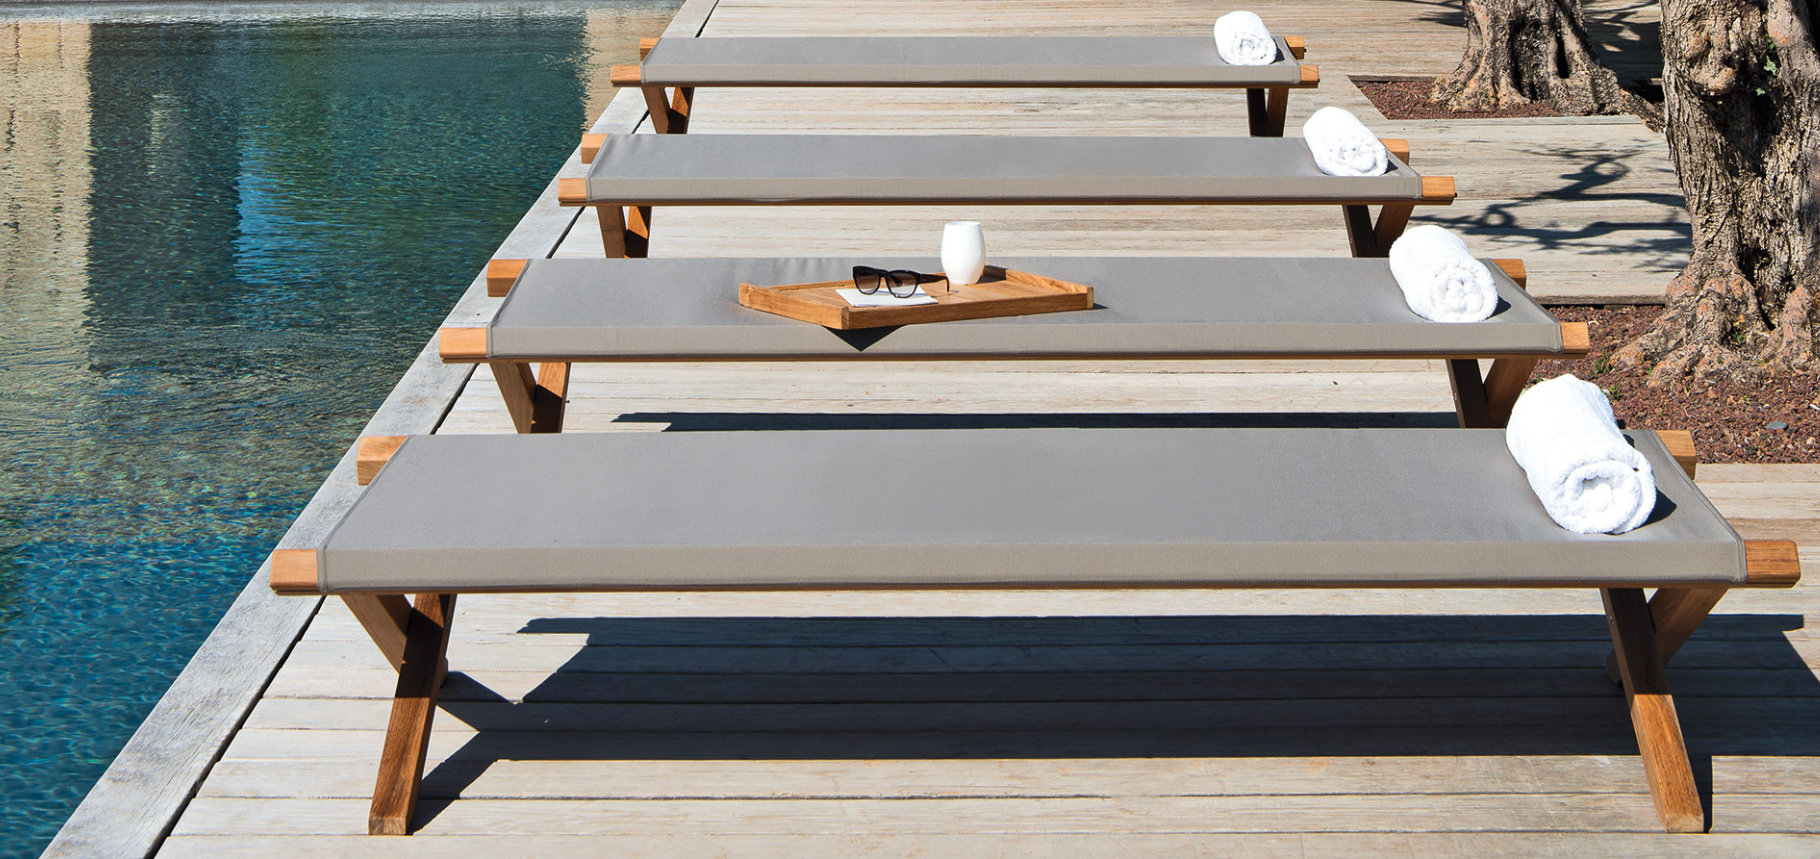 Elit sun bed sun lounger from Ethimo